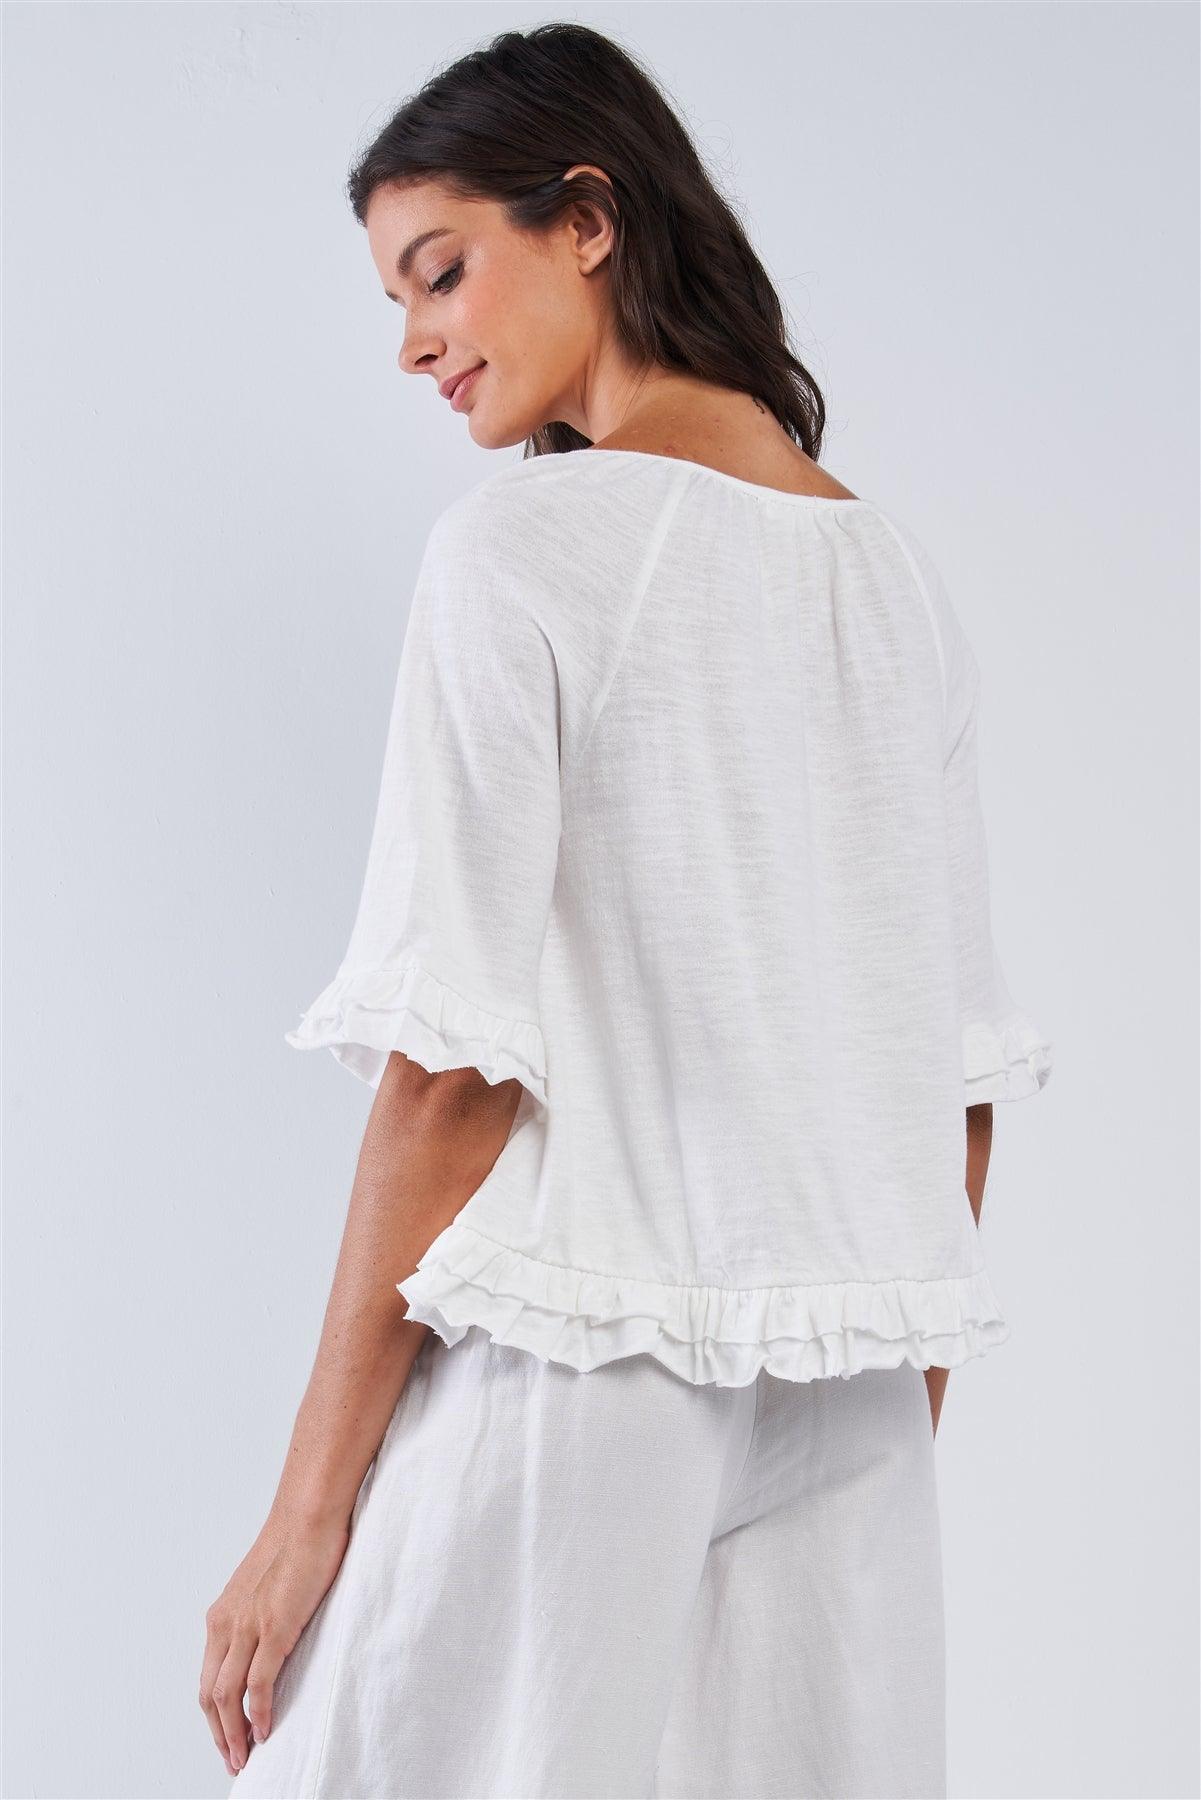 Solid White Cotton Loose Fit Mid Sleeve Ruffle Hem Country Style Peasant Top